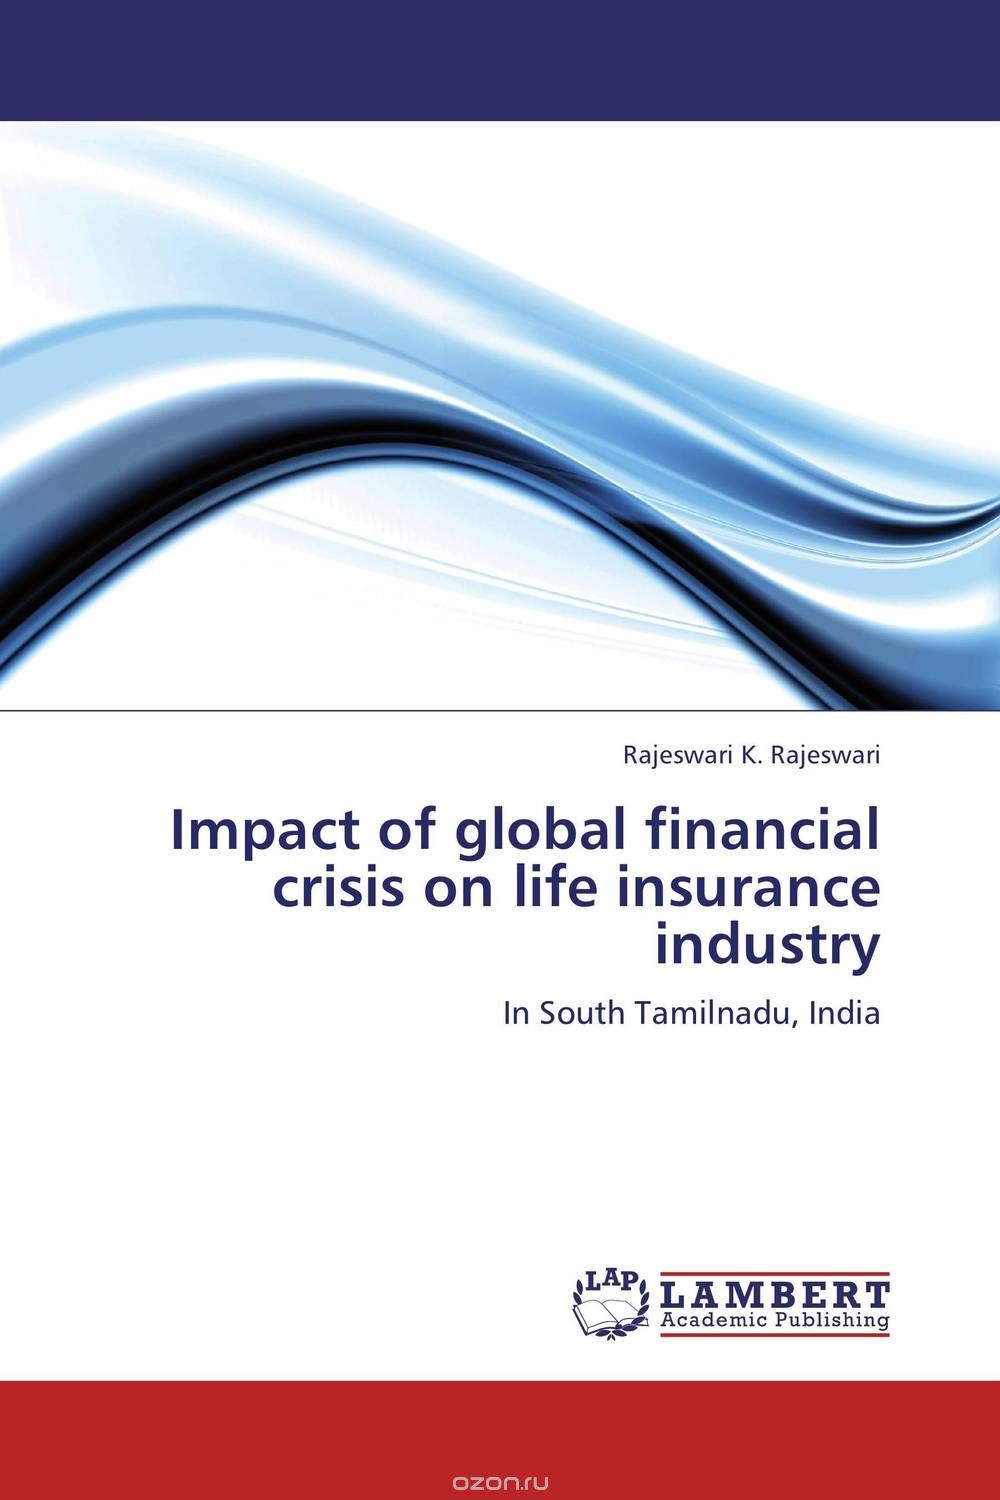 Impact of global financial crisis on life insurance industry